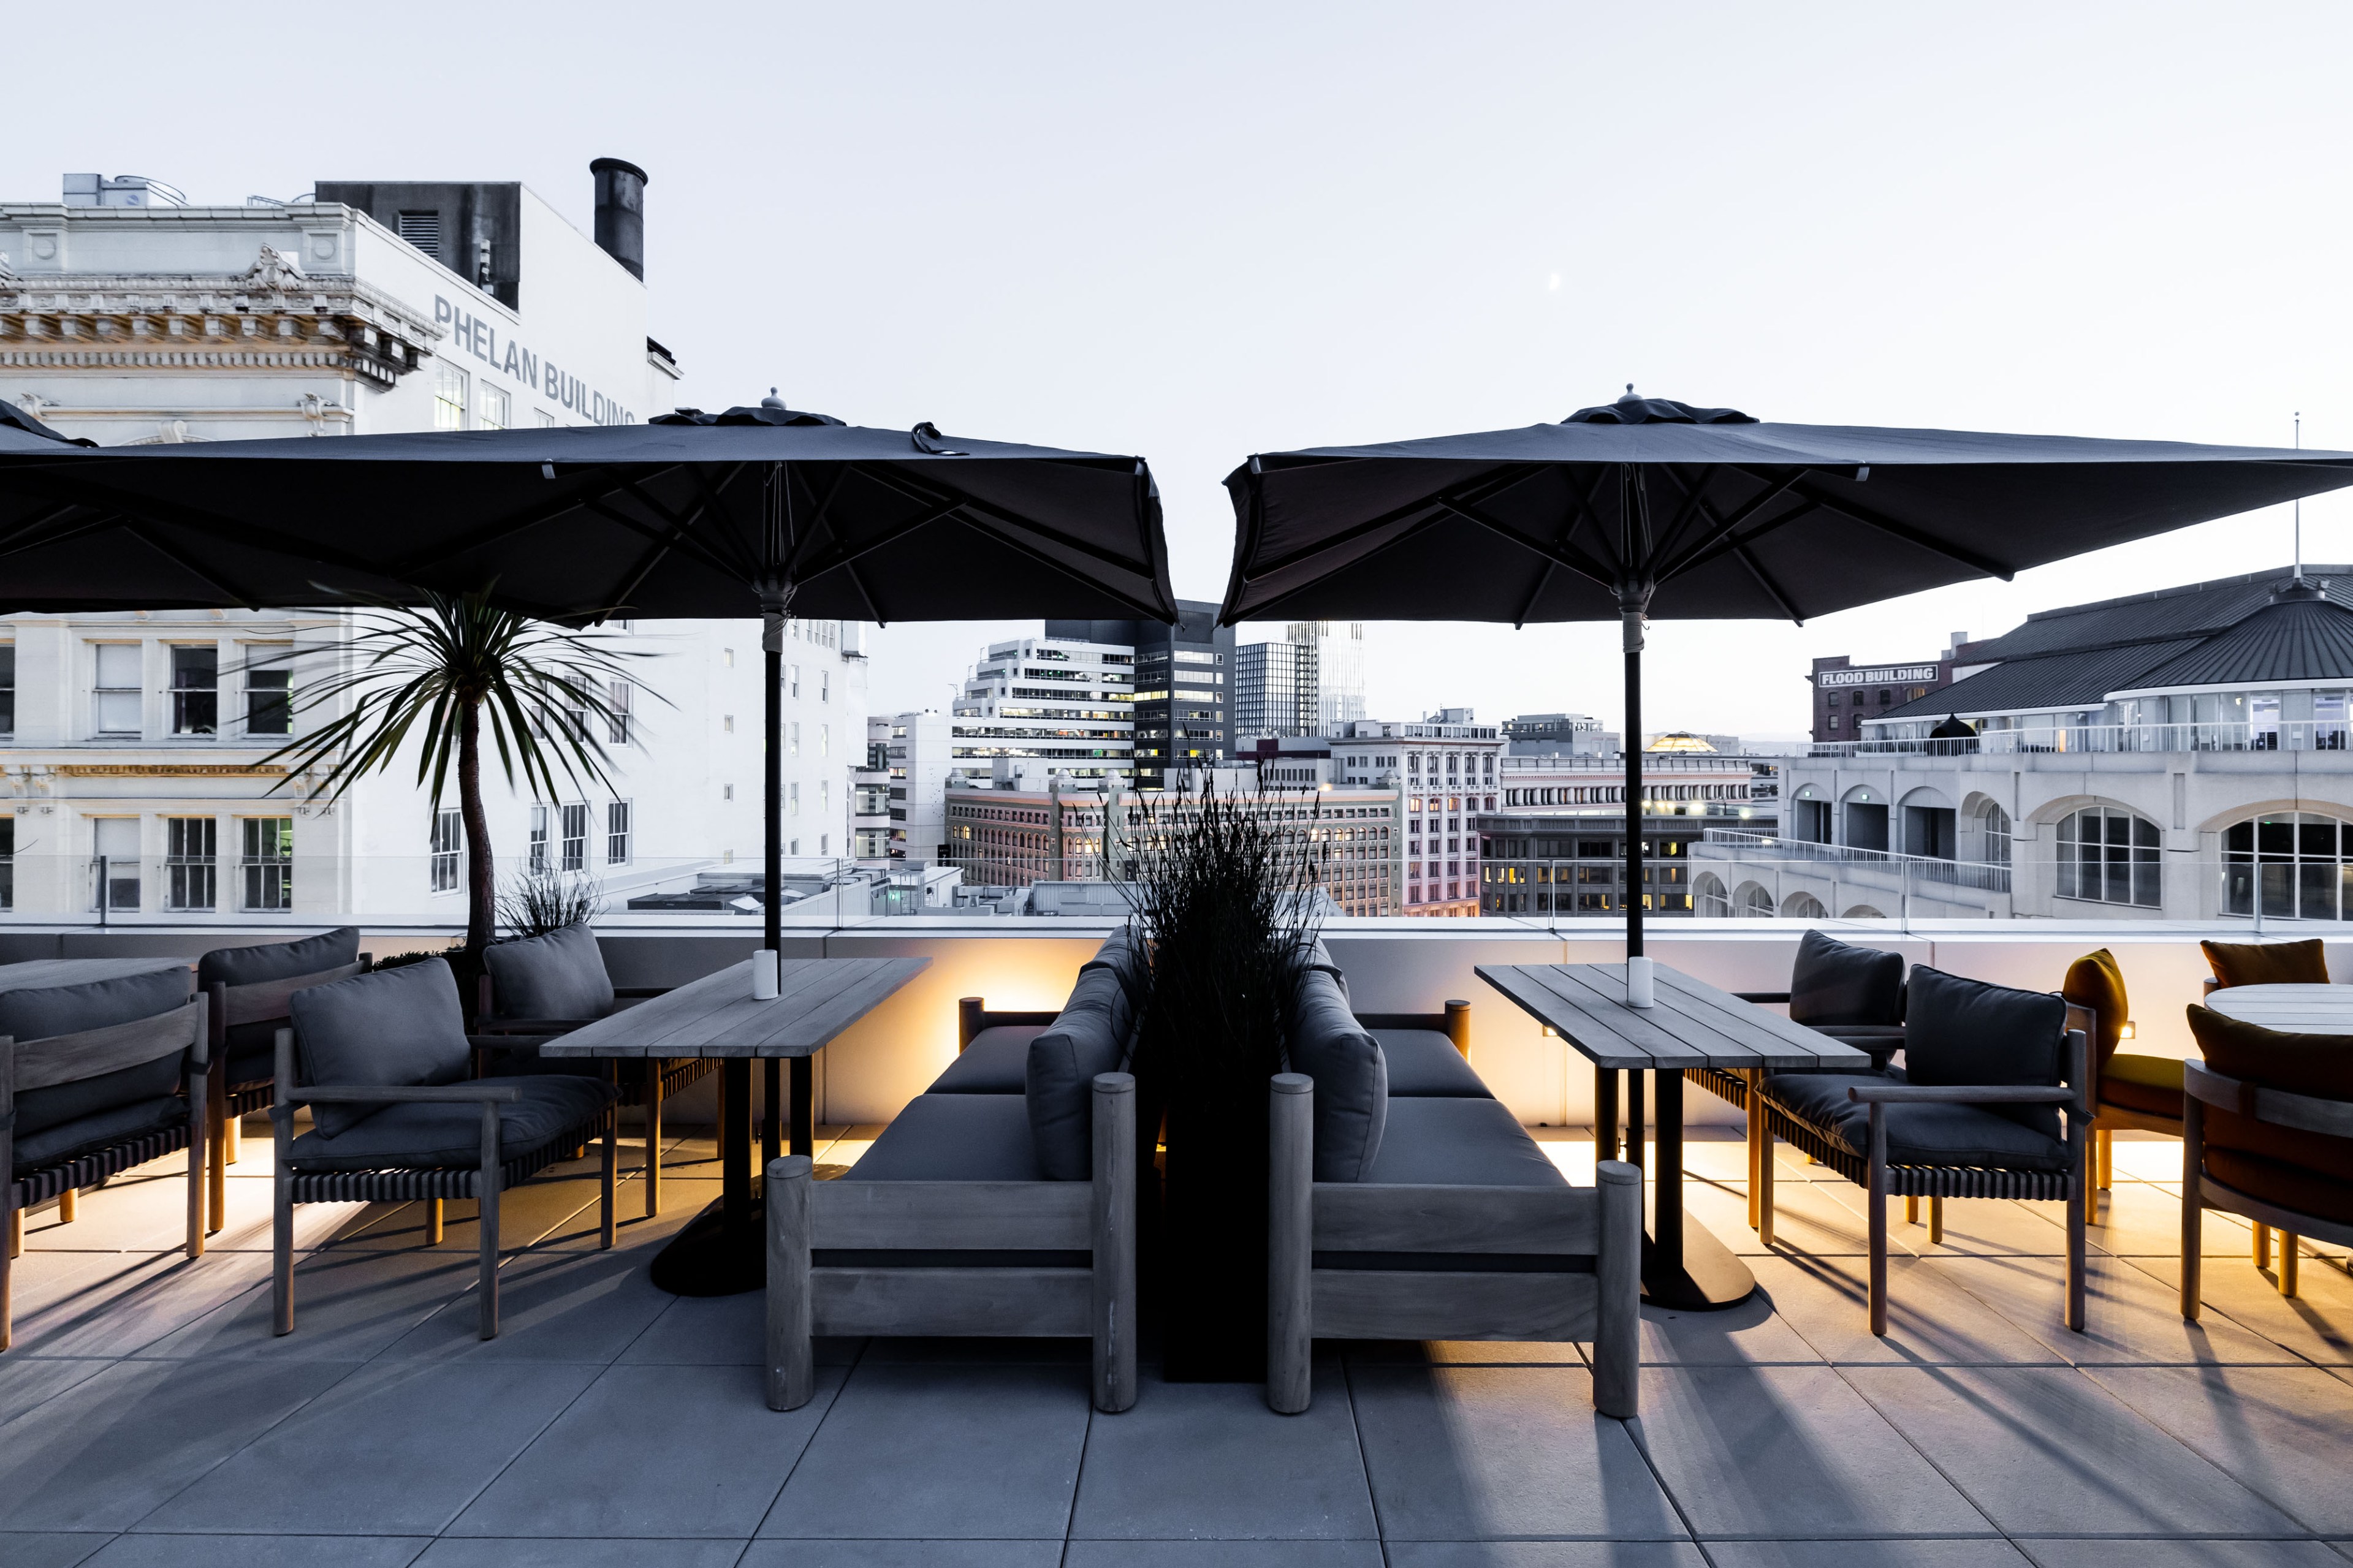 Tables with umbrellas stand on a rooftop patio with the San Francisco skyline in the background.